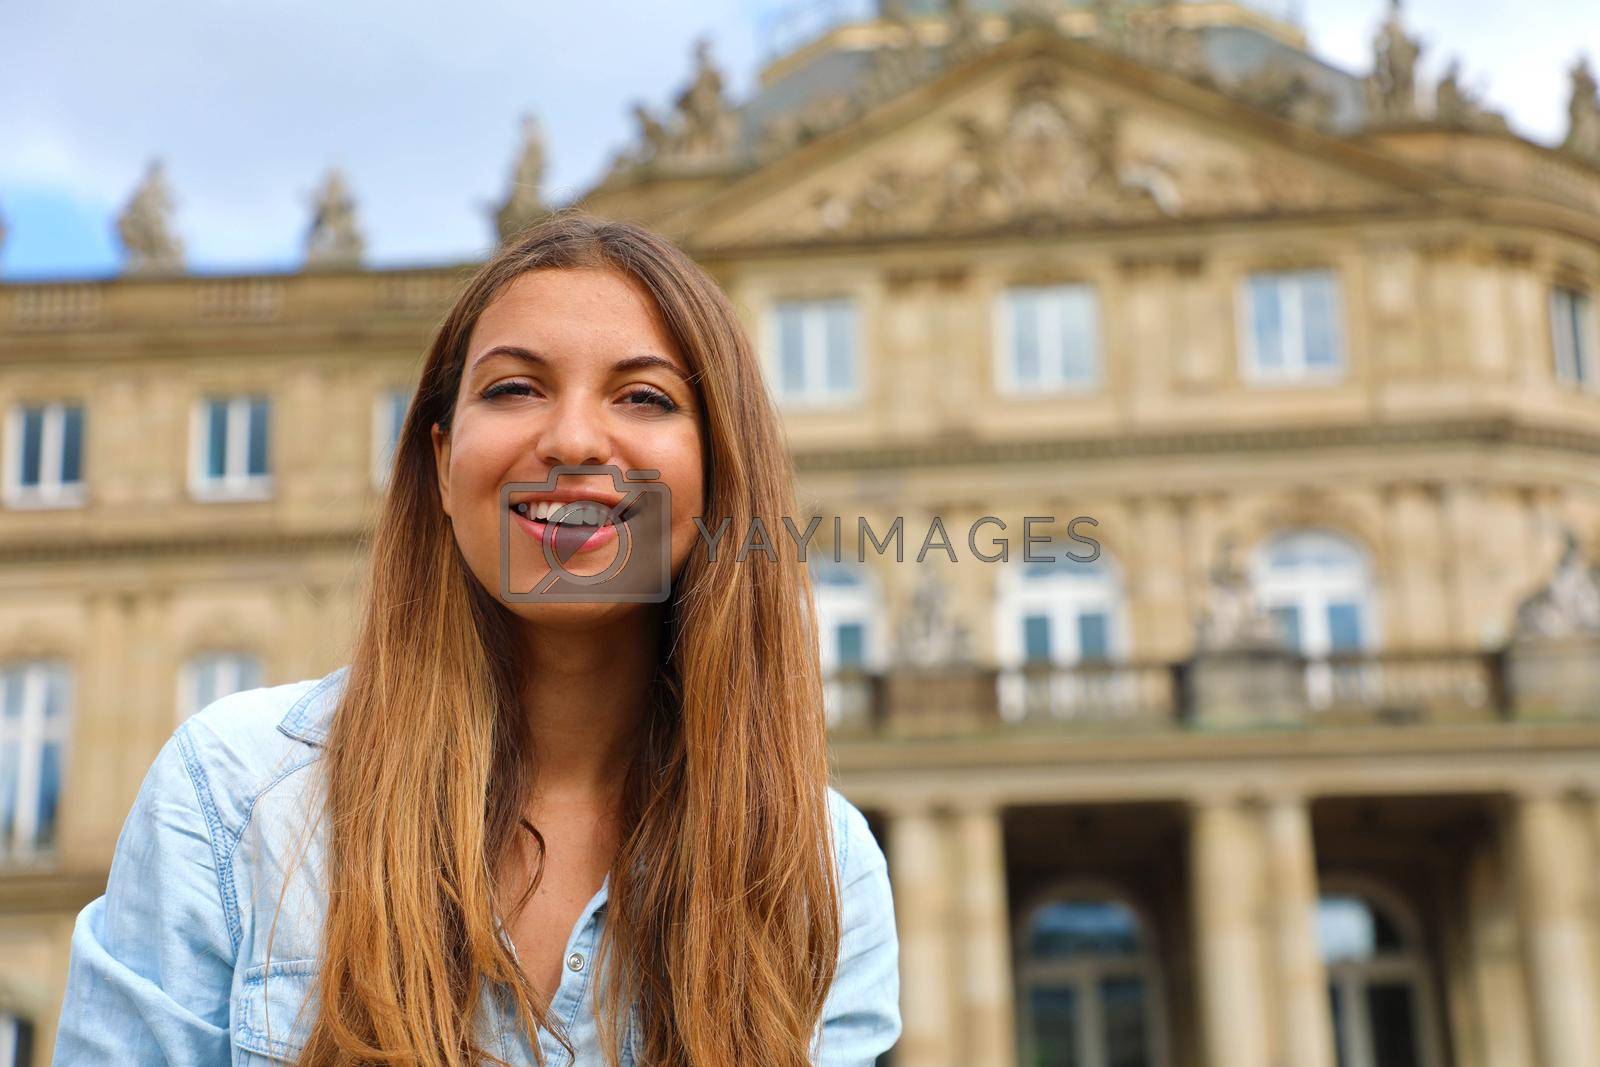 Royalty free image of Smiling young woman in front of Neues Schloss (New Palace) of Stuttgart, Germany by sergio_monti